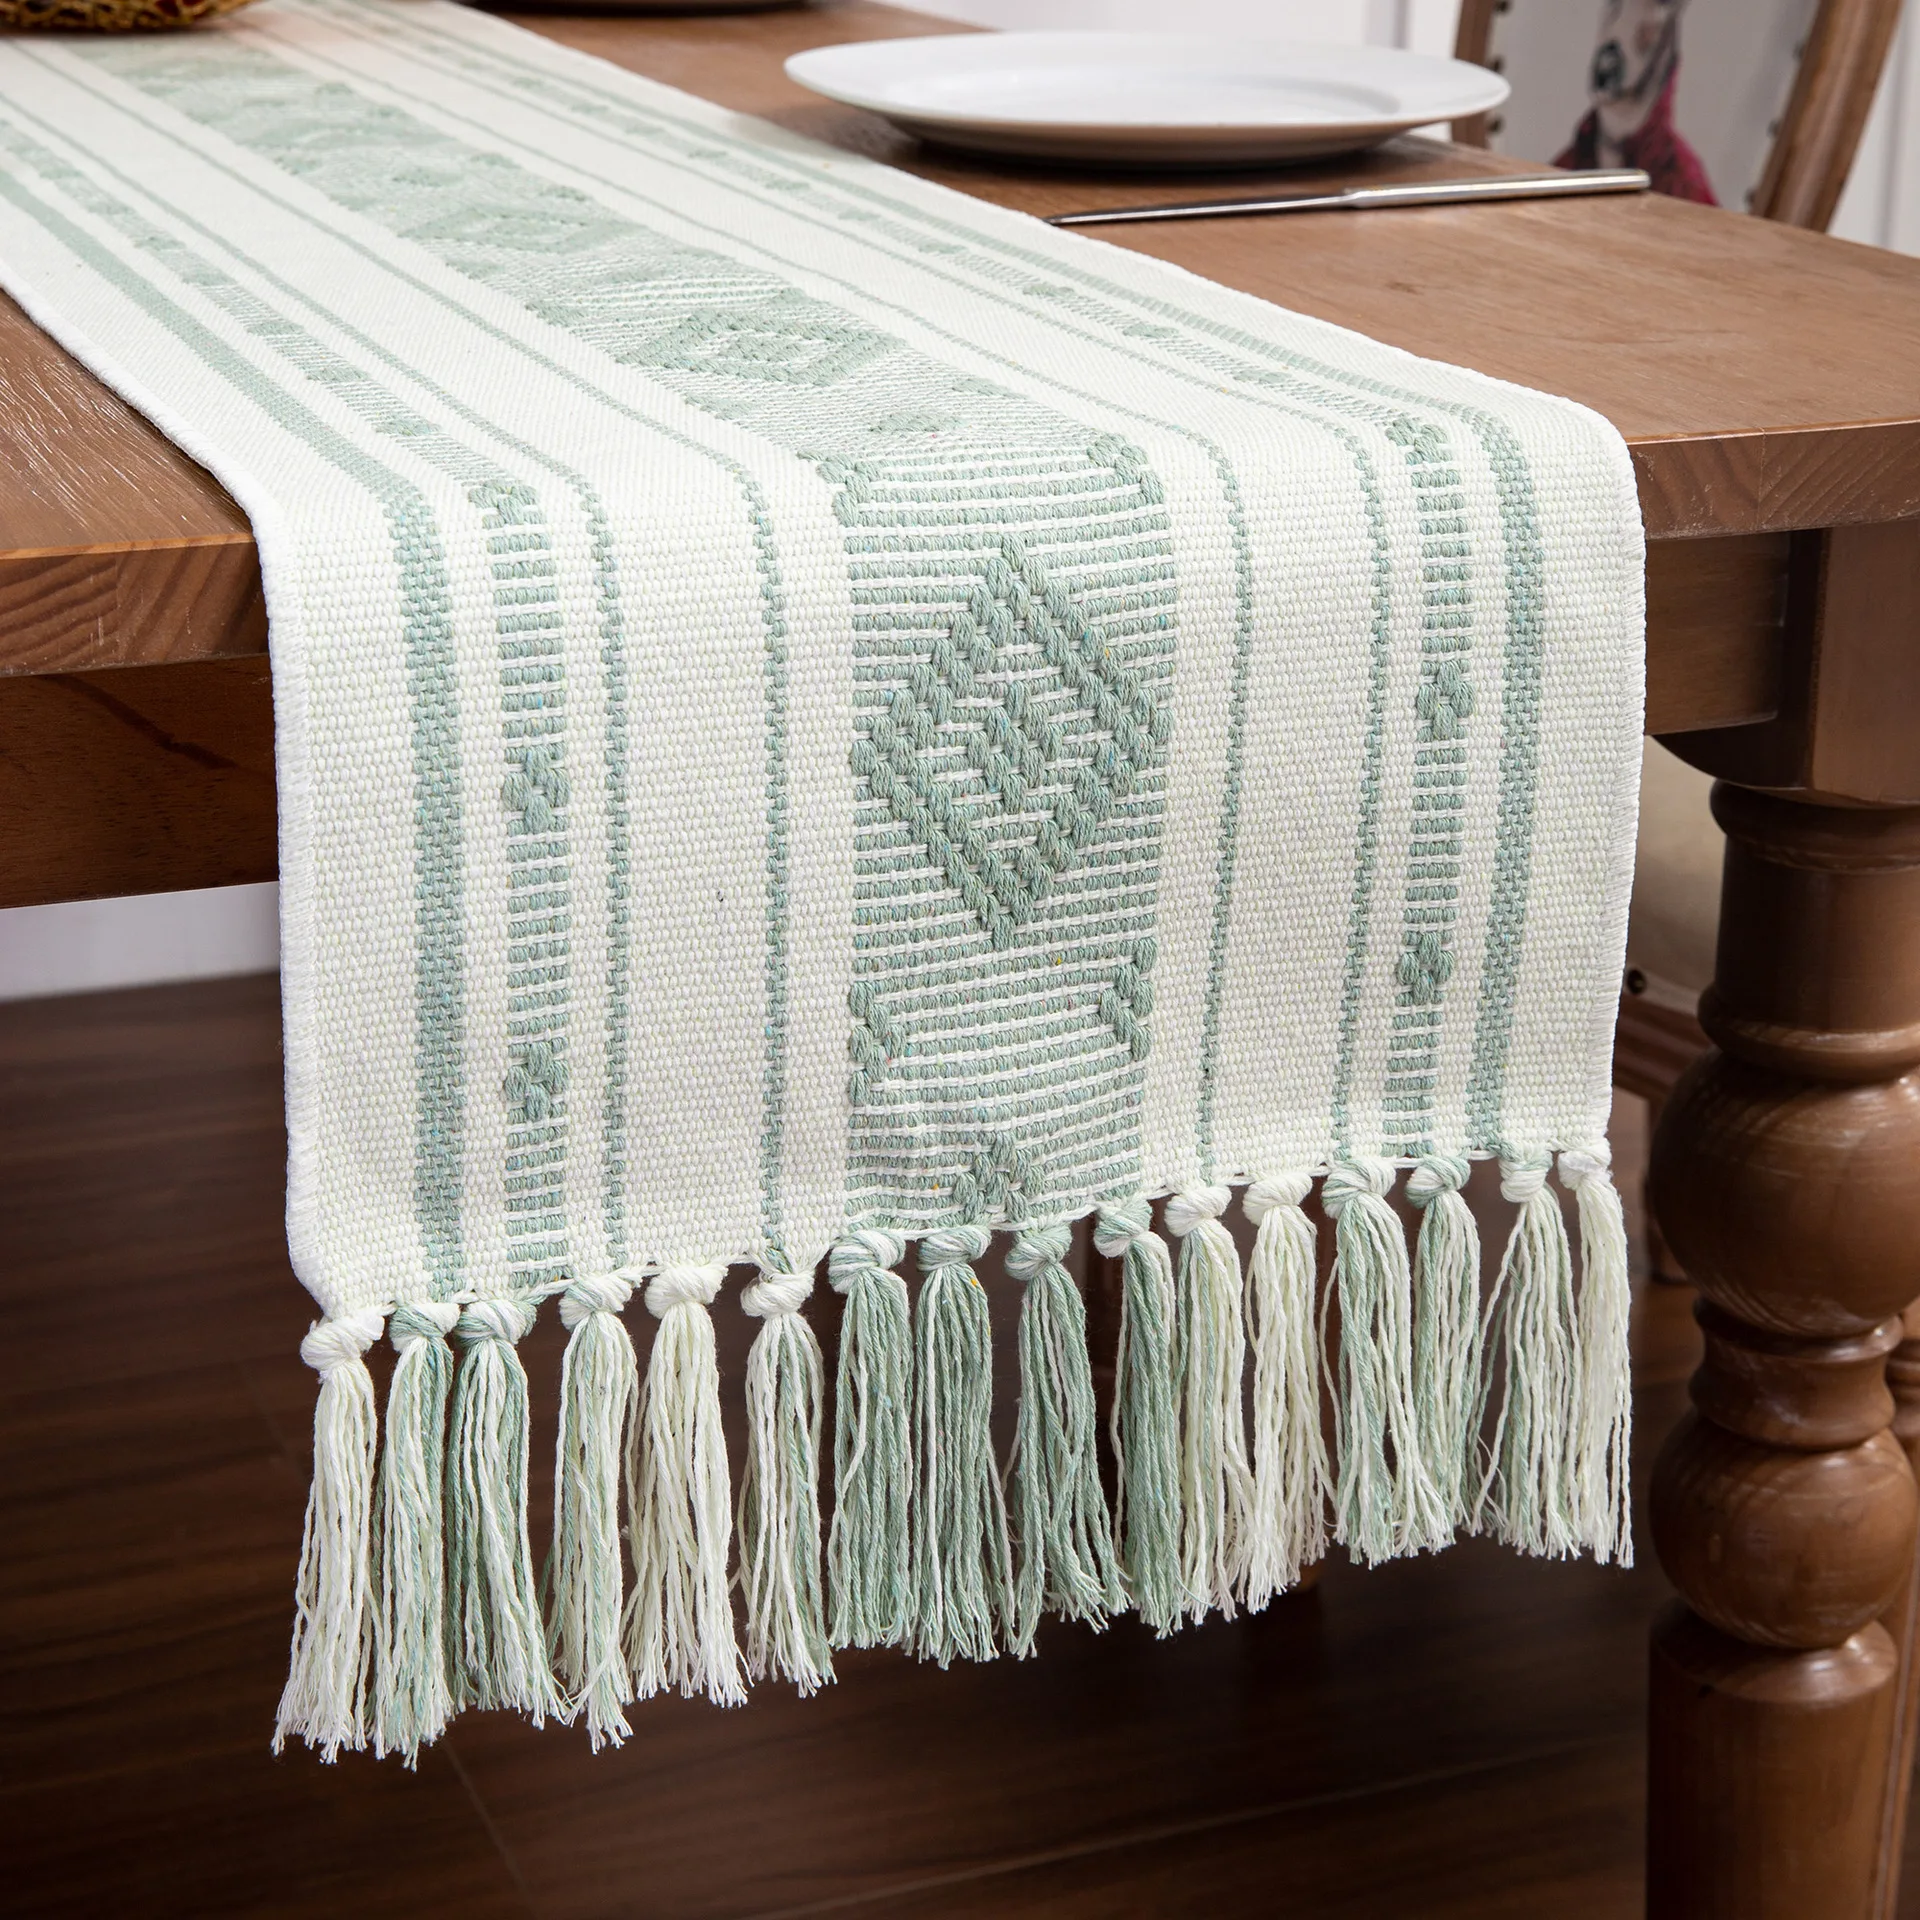 

Boho Woven Table Runner Rustic Table Runners Modern Farmhouse Style Vintage Rustic Table Runner with Tassels for Table Decor